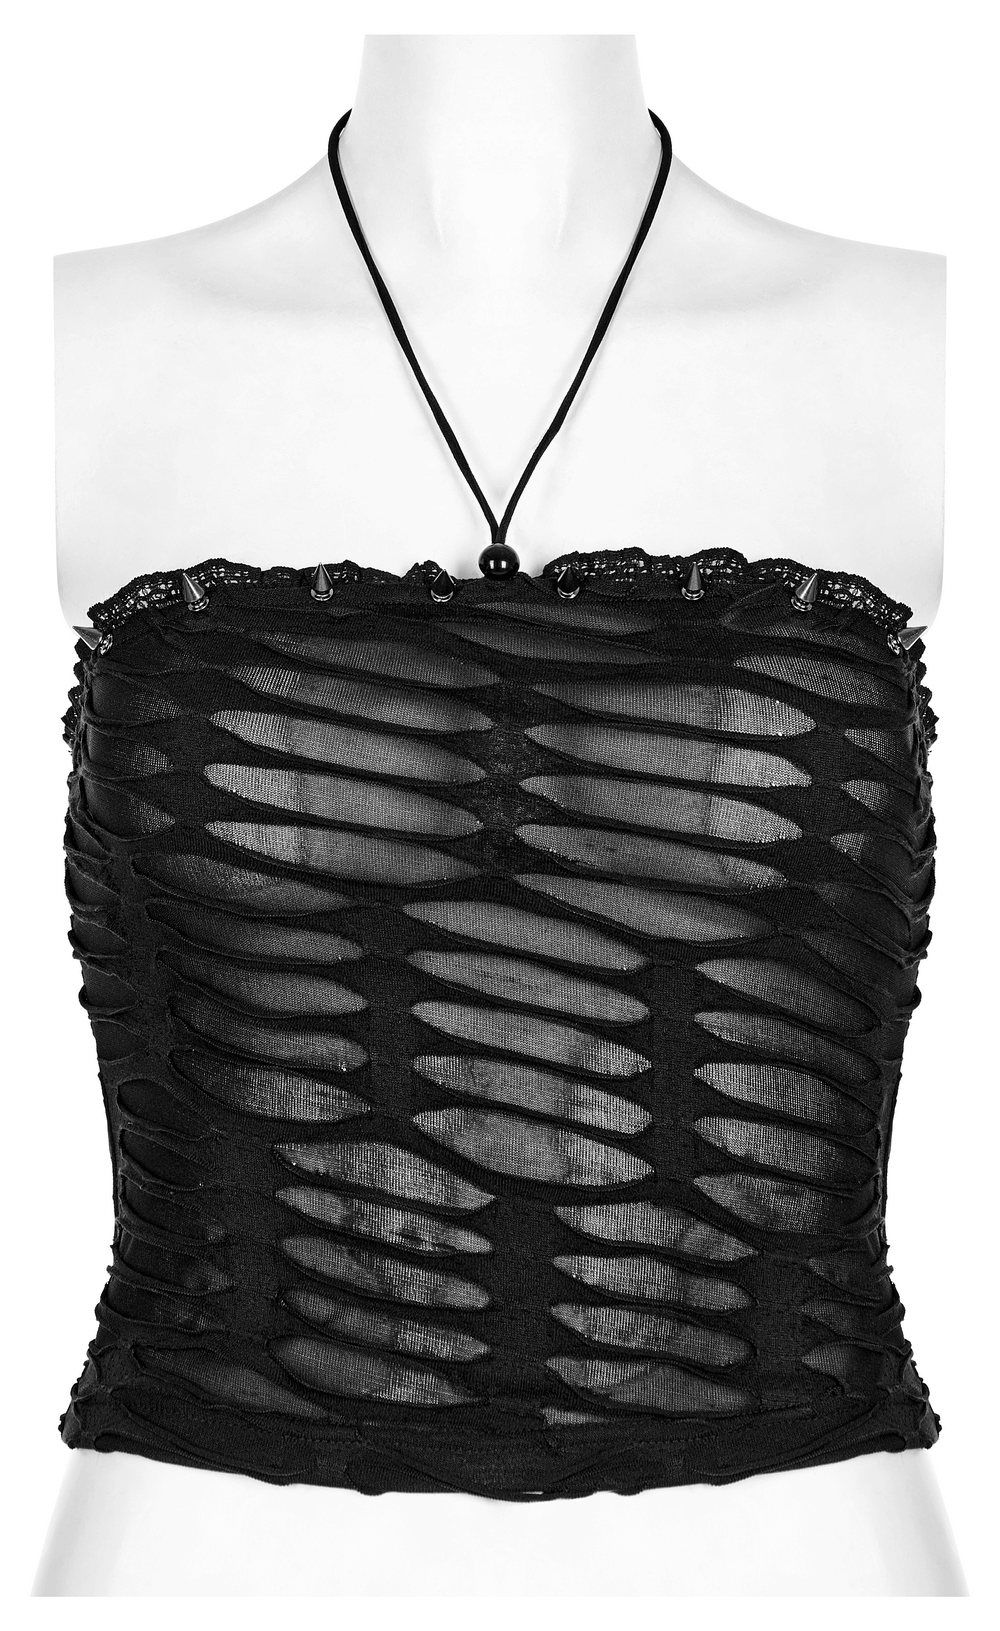 Lace and Rivet Detailed Gothic Bustier for Stylish Edge - HARD'N'HEAVY